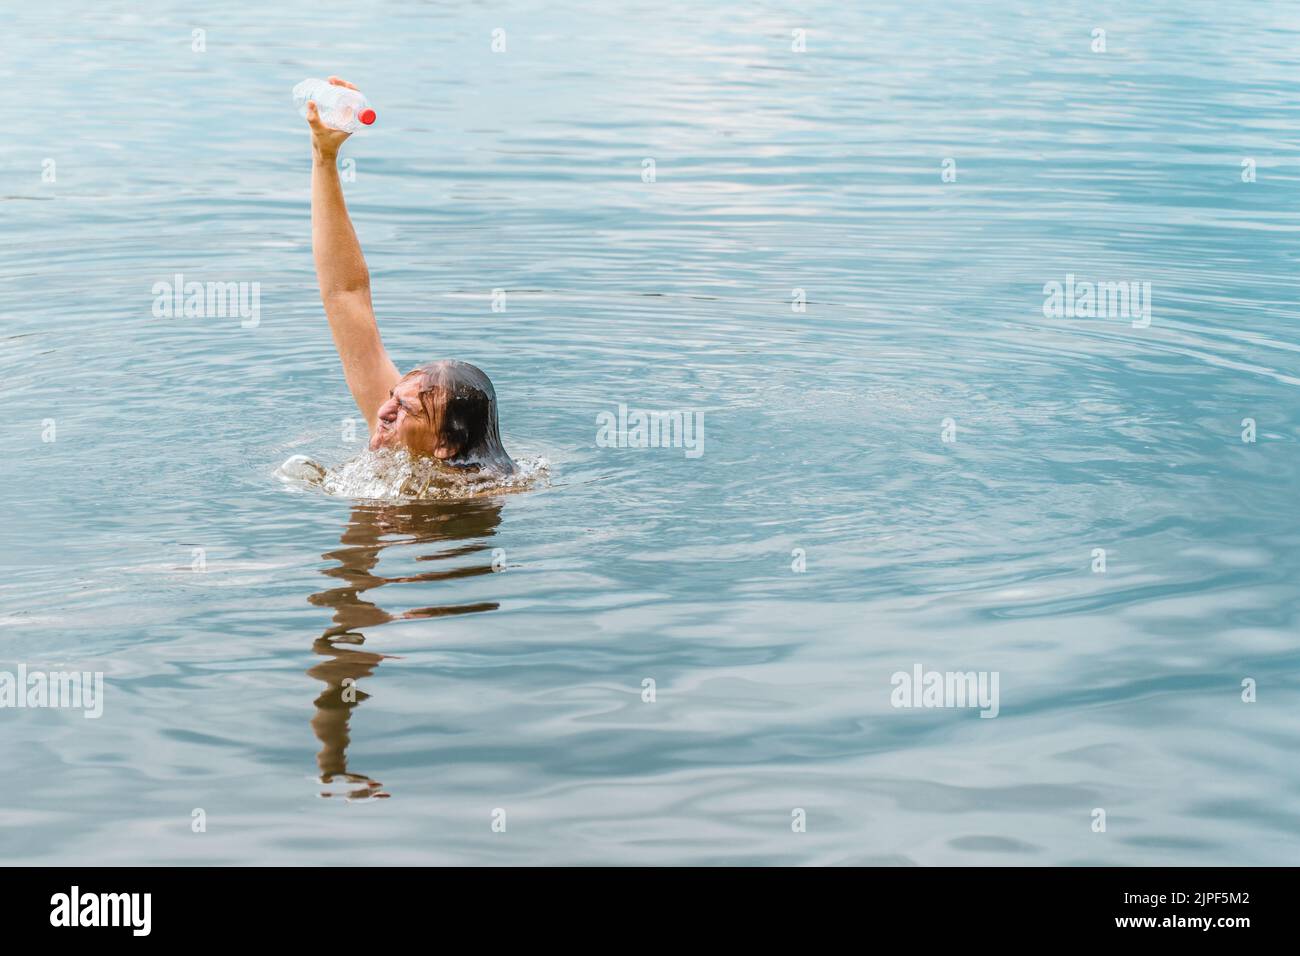 Emerging from water person success man winning moment. Save ocean plastic pollution. Arm raised hand holding bottle plastic garbage beach pollution Stock Photo